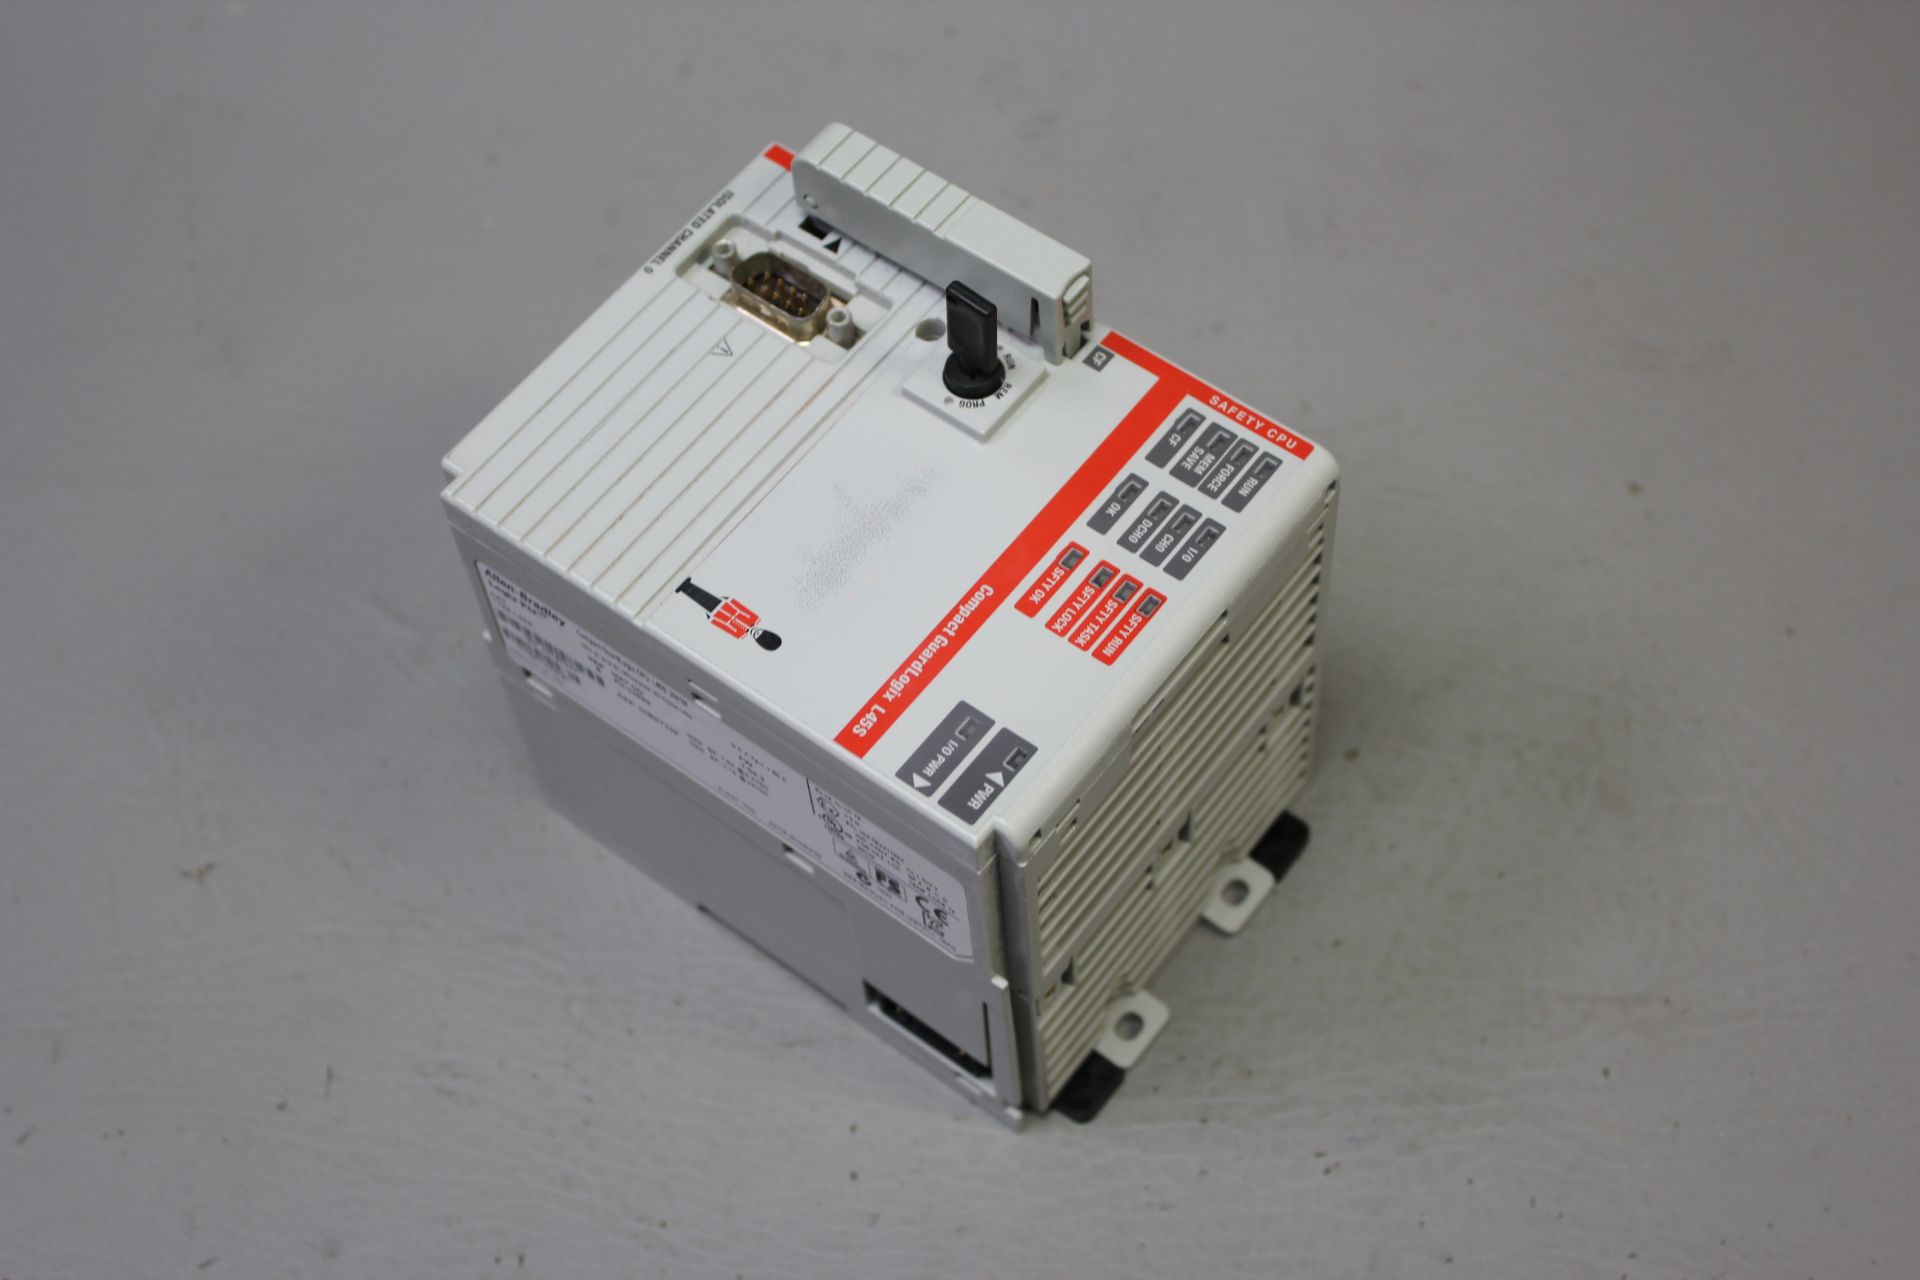 ALLEN BRADLEY COMPACT GUARDLOGIX SAFETY CPU - Image 2 of 7